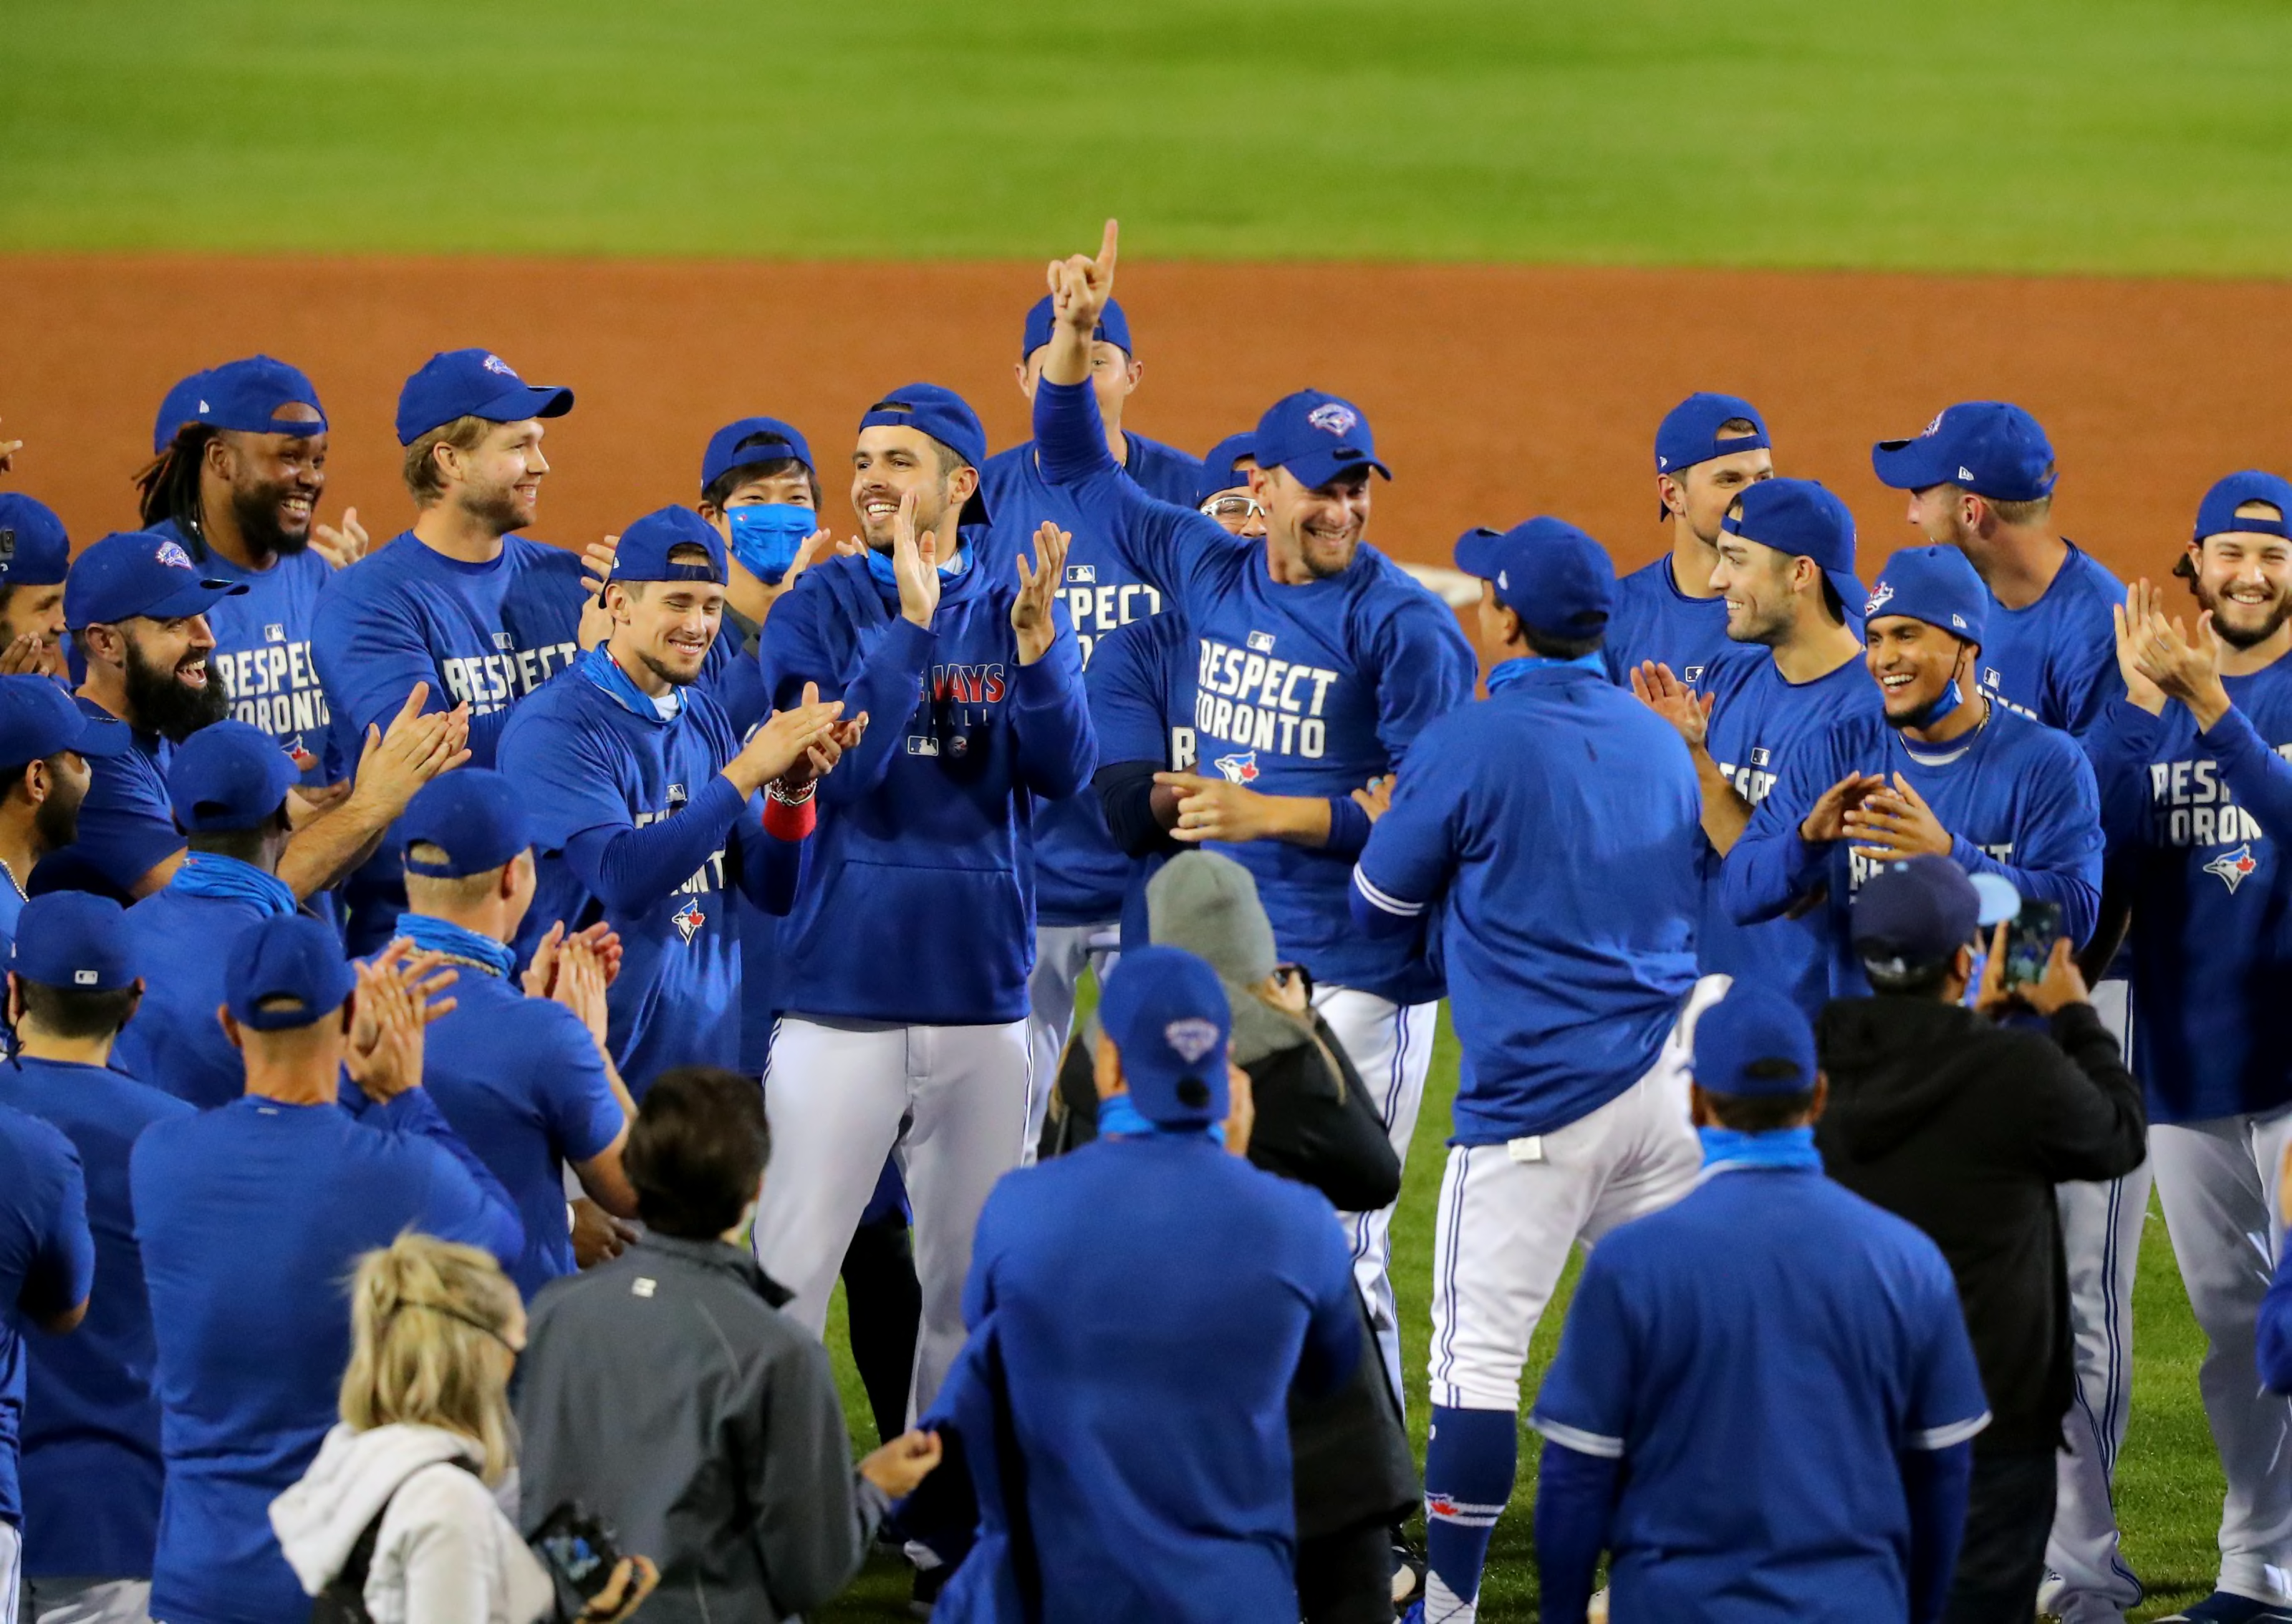 Toronto Blue Jays Top 10 Moments From The Season